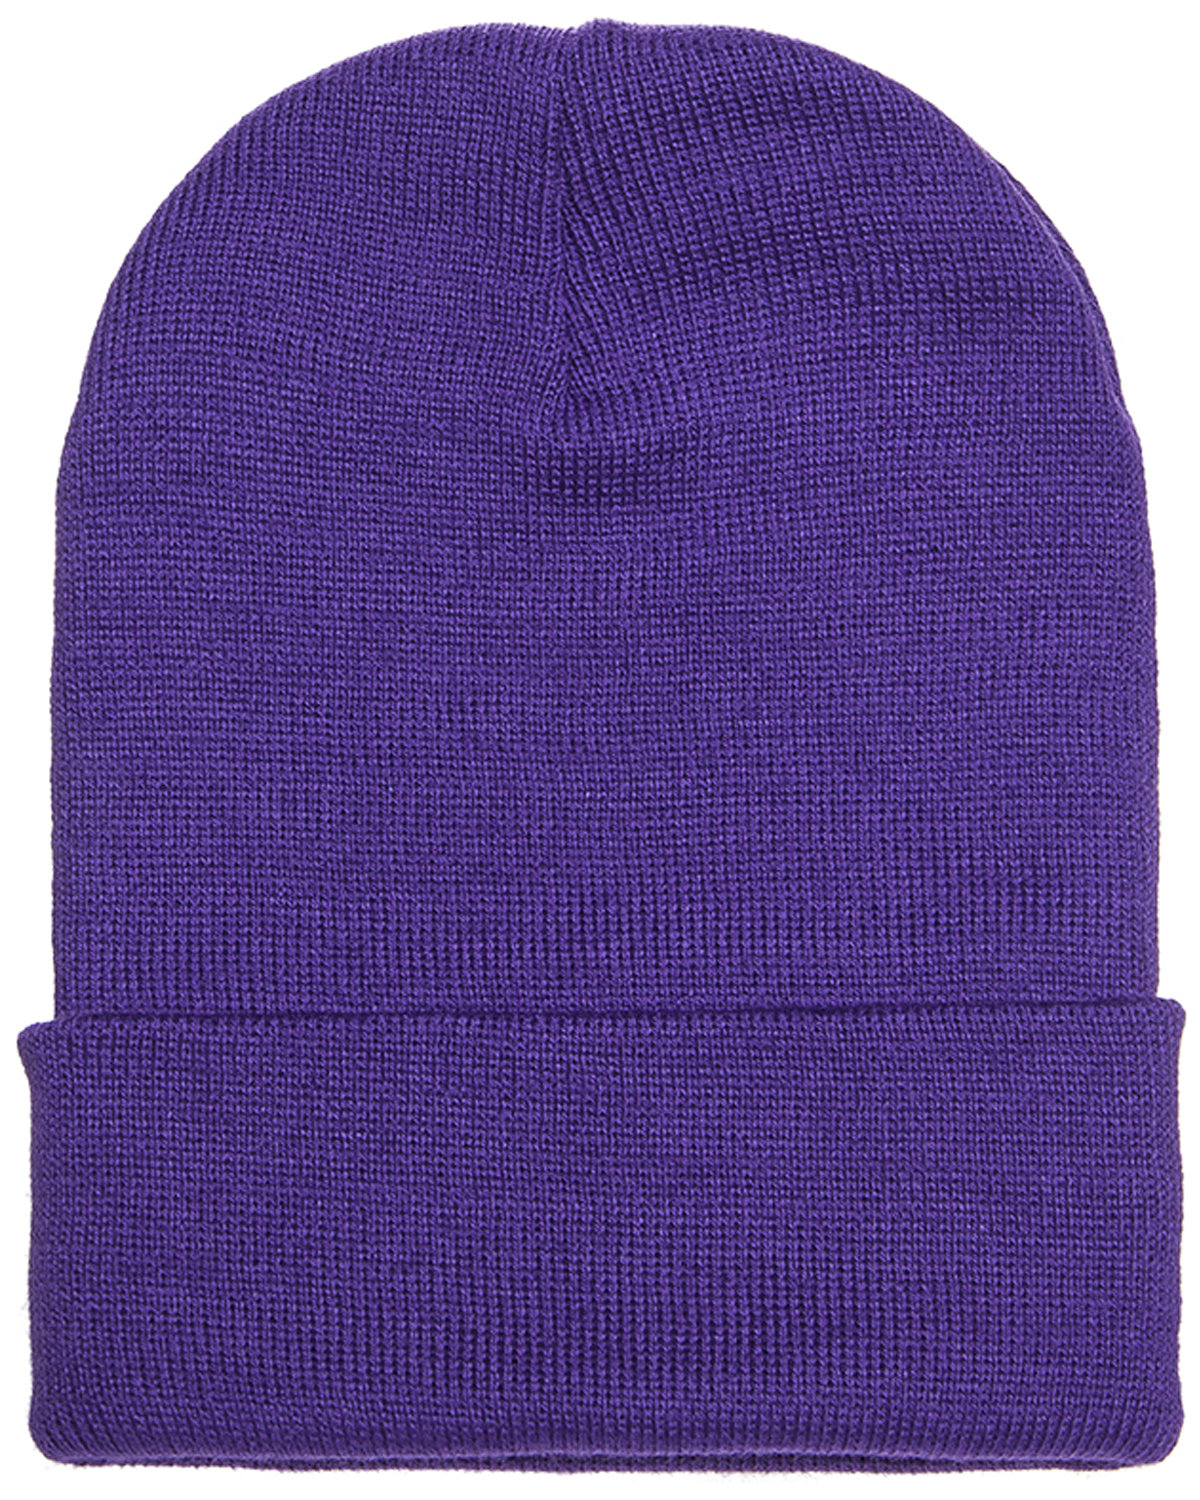 Yupoong Adult Cuffed | Beanie Knit alphabroder